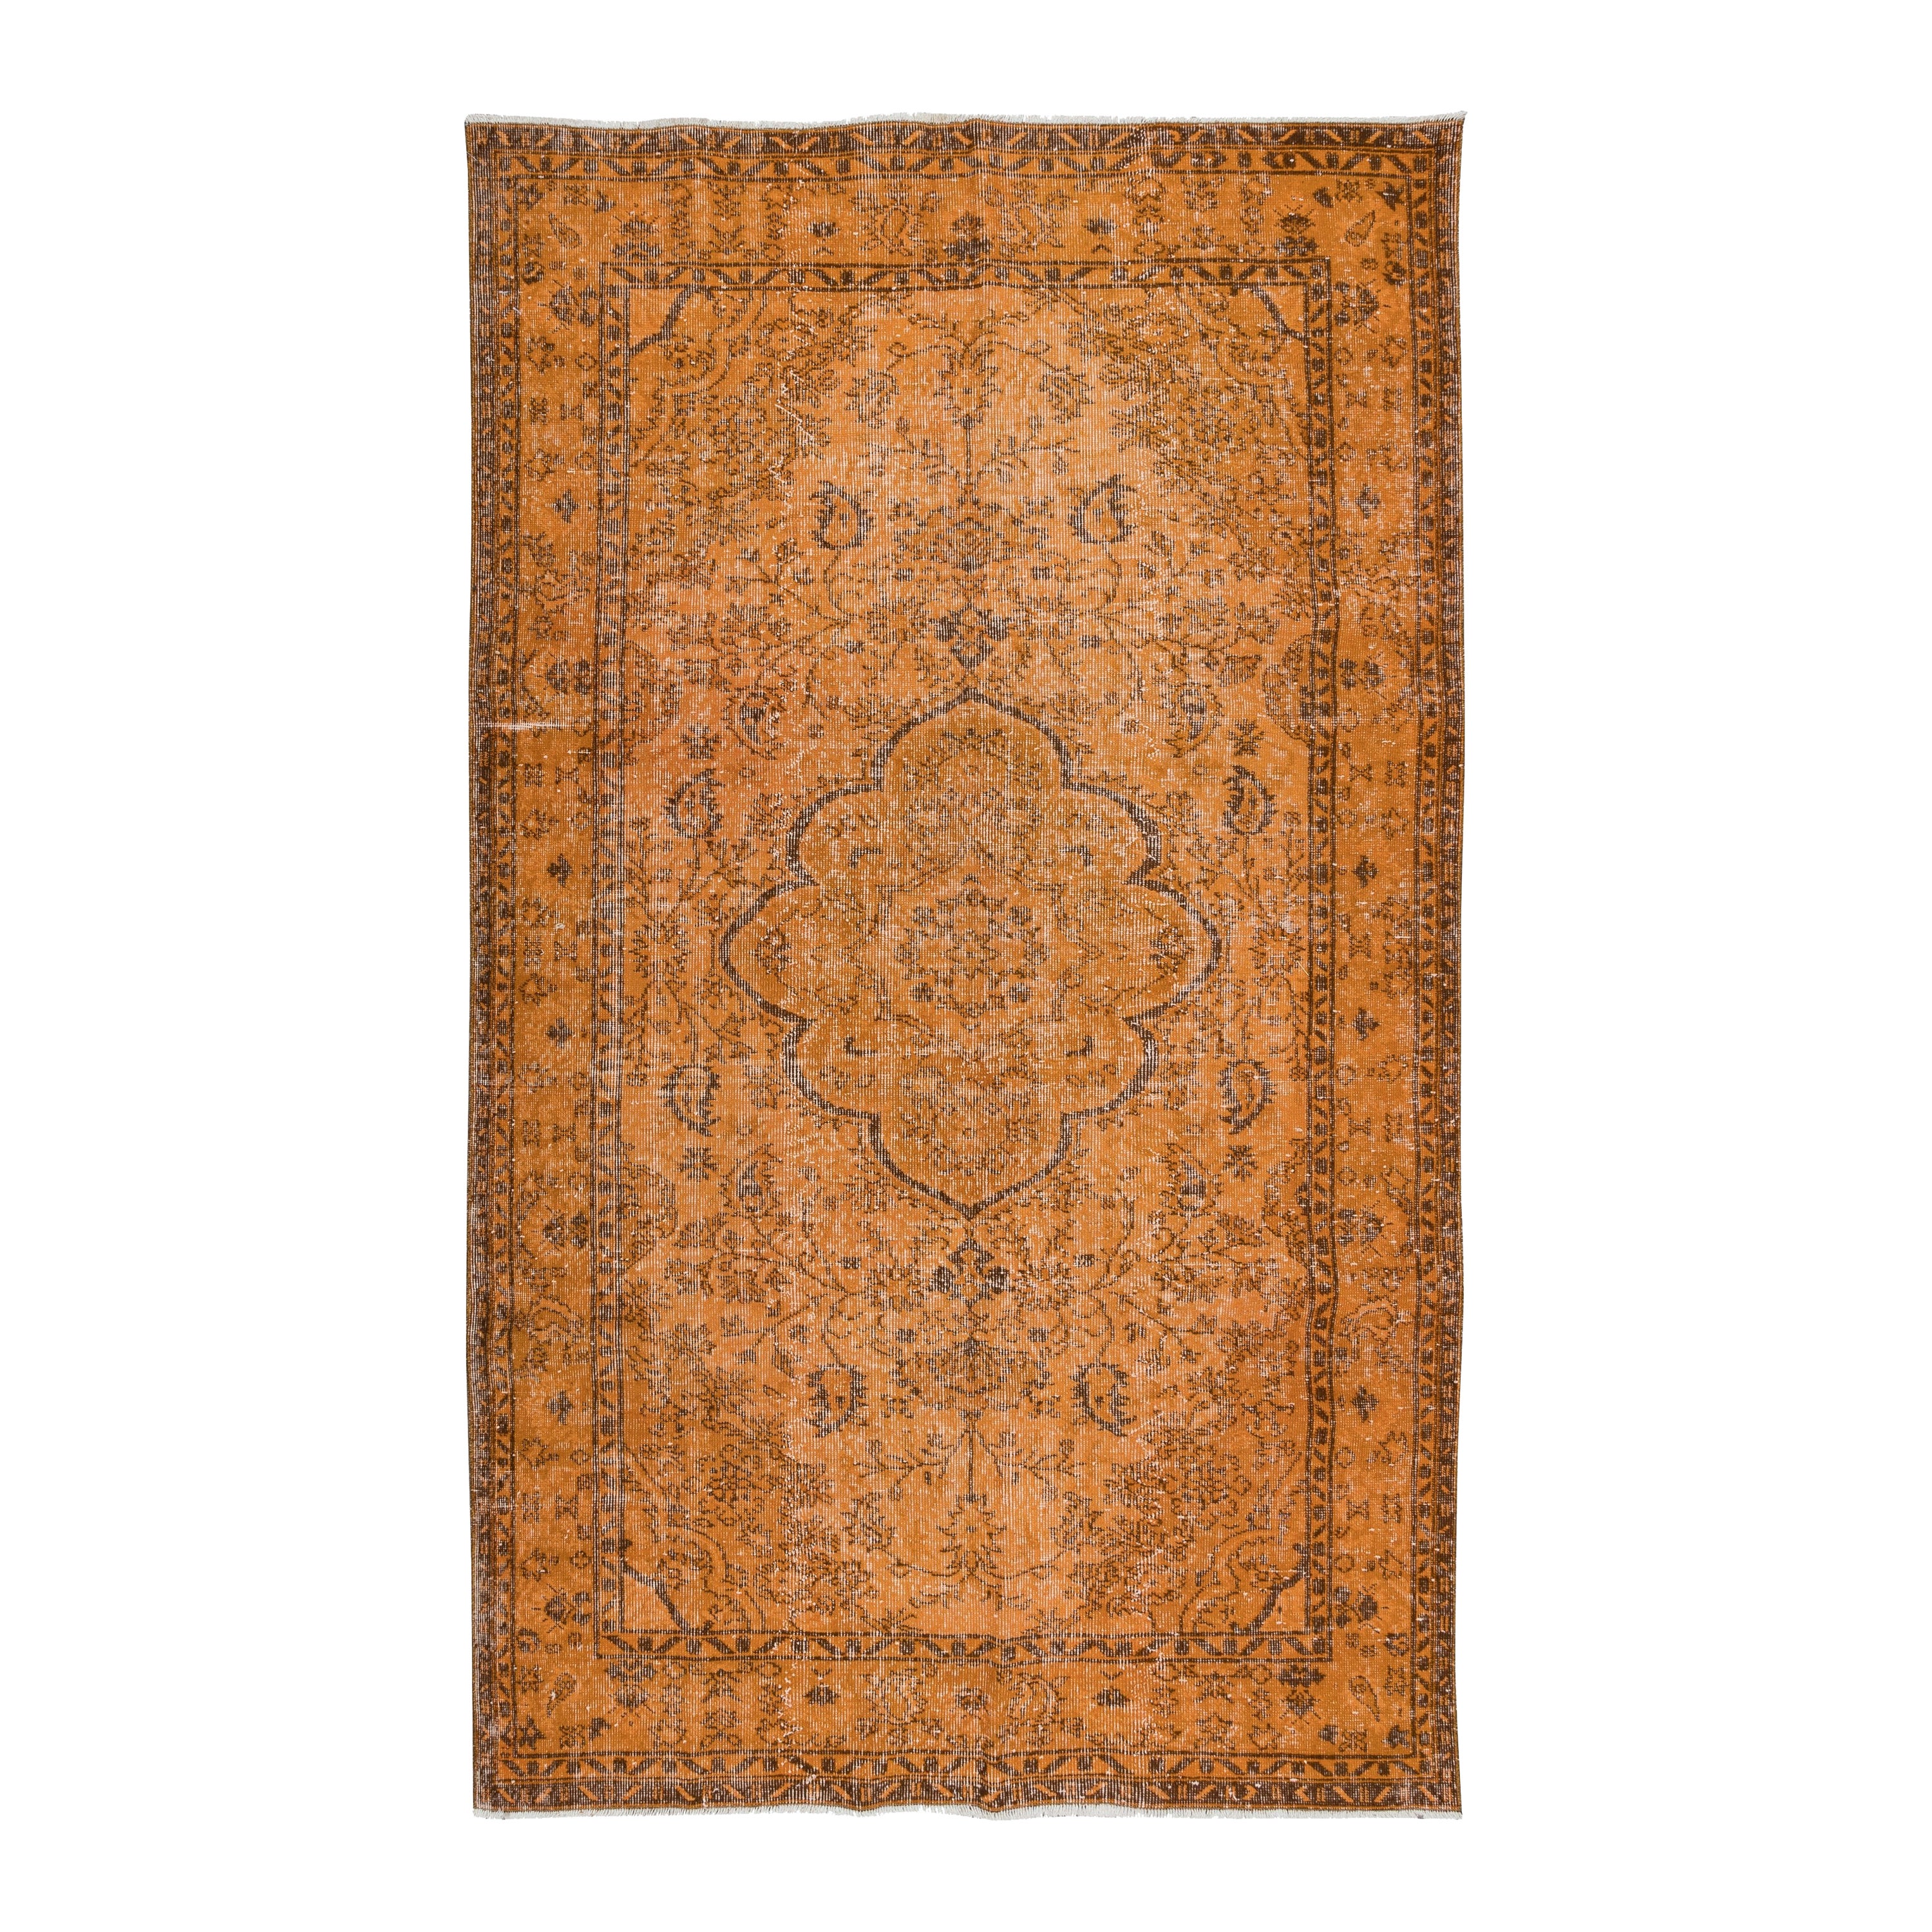 5.2x8.8 Ft Vintage Orange Area Rug, Handwoven and Handknotted in Turkey